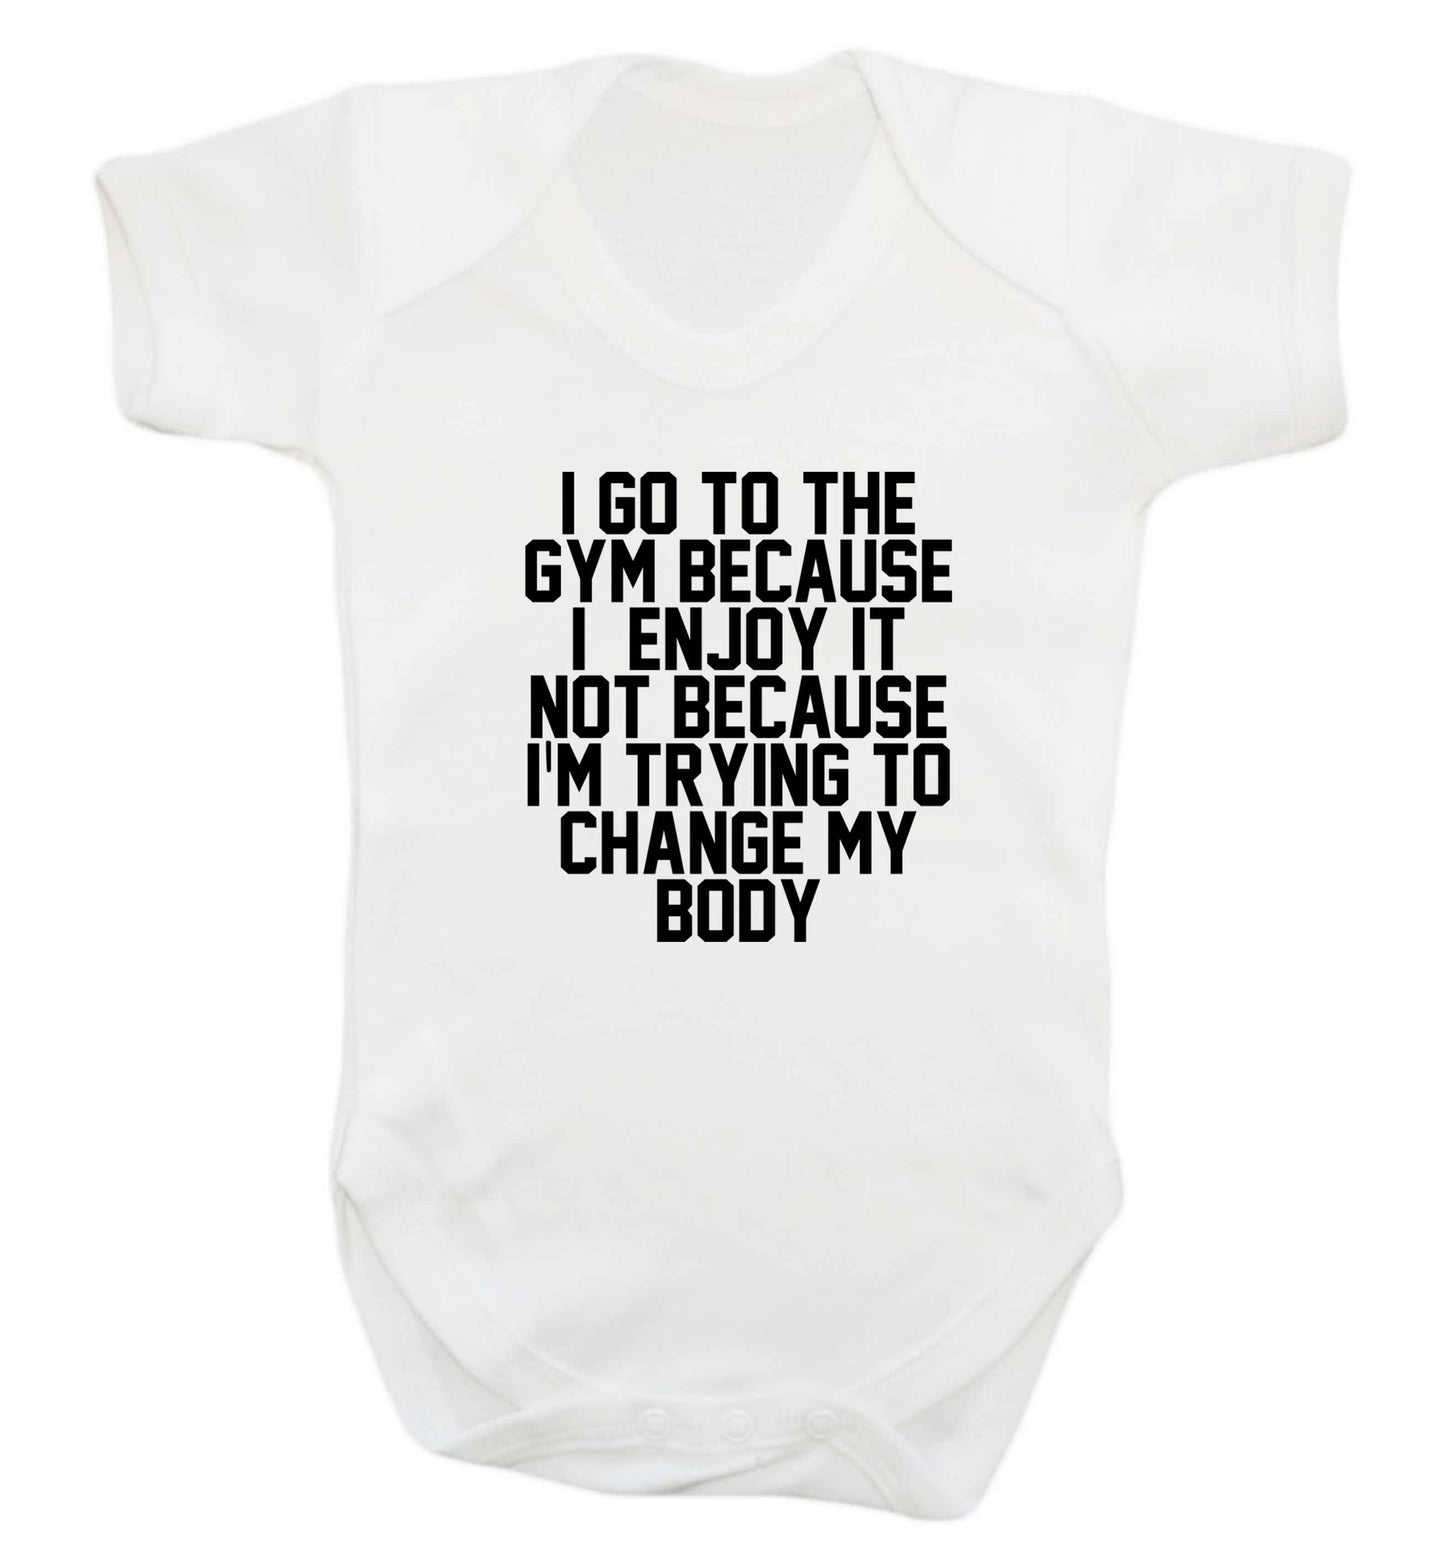 I go to the gym because I enjoy it not because I'm trying to change my body baby vest white 18-24 months